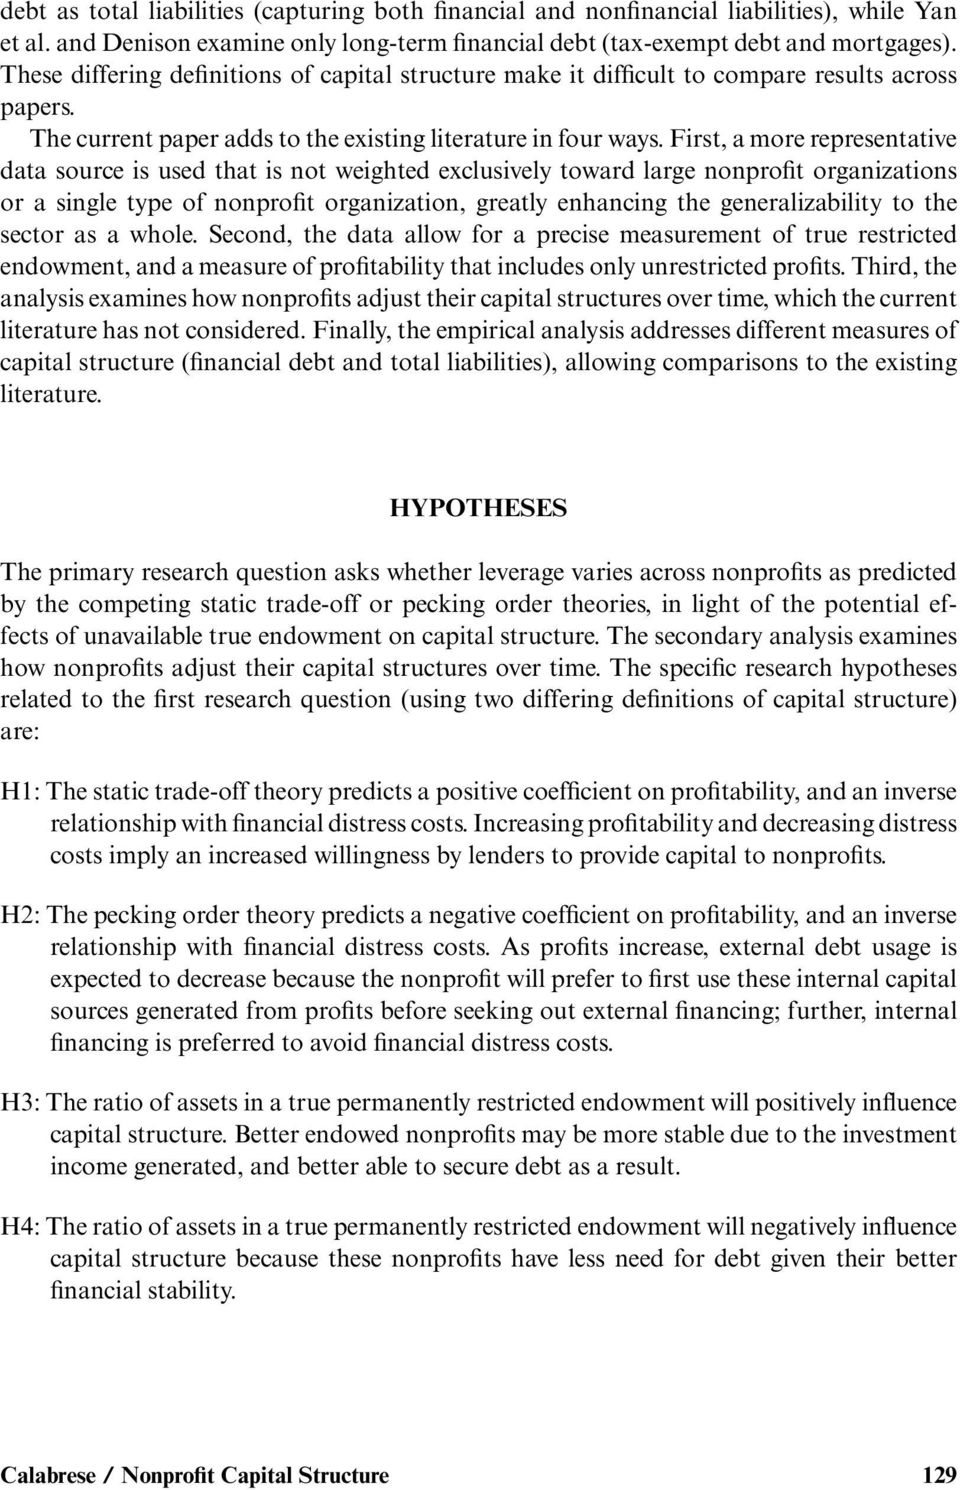 the static theory of capital structure